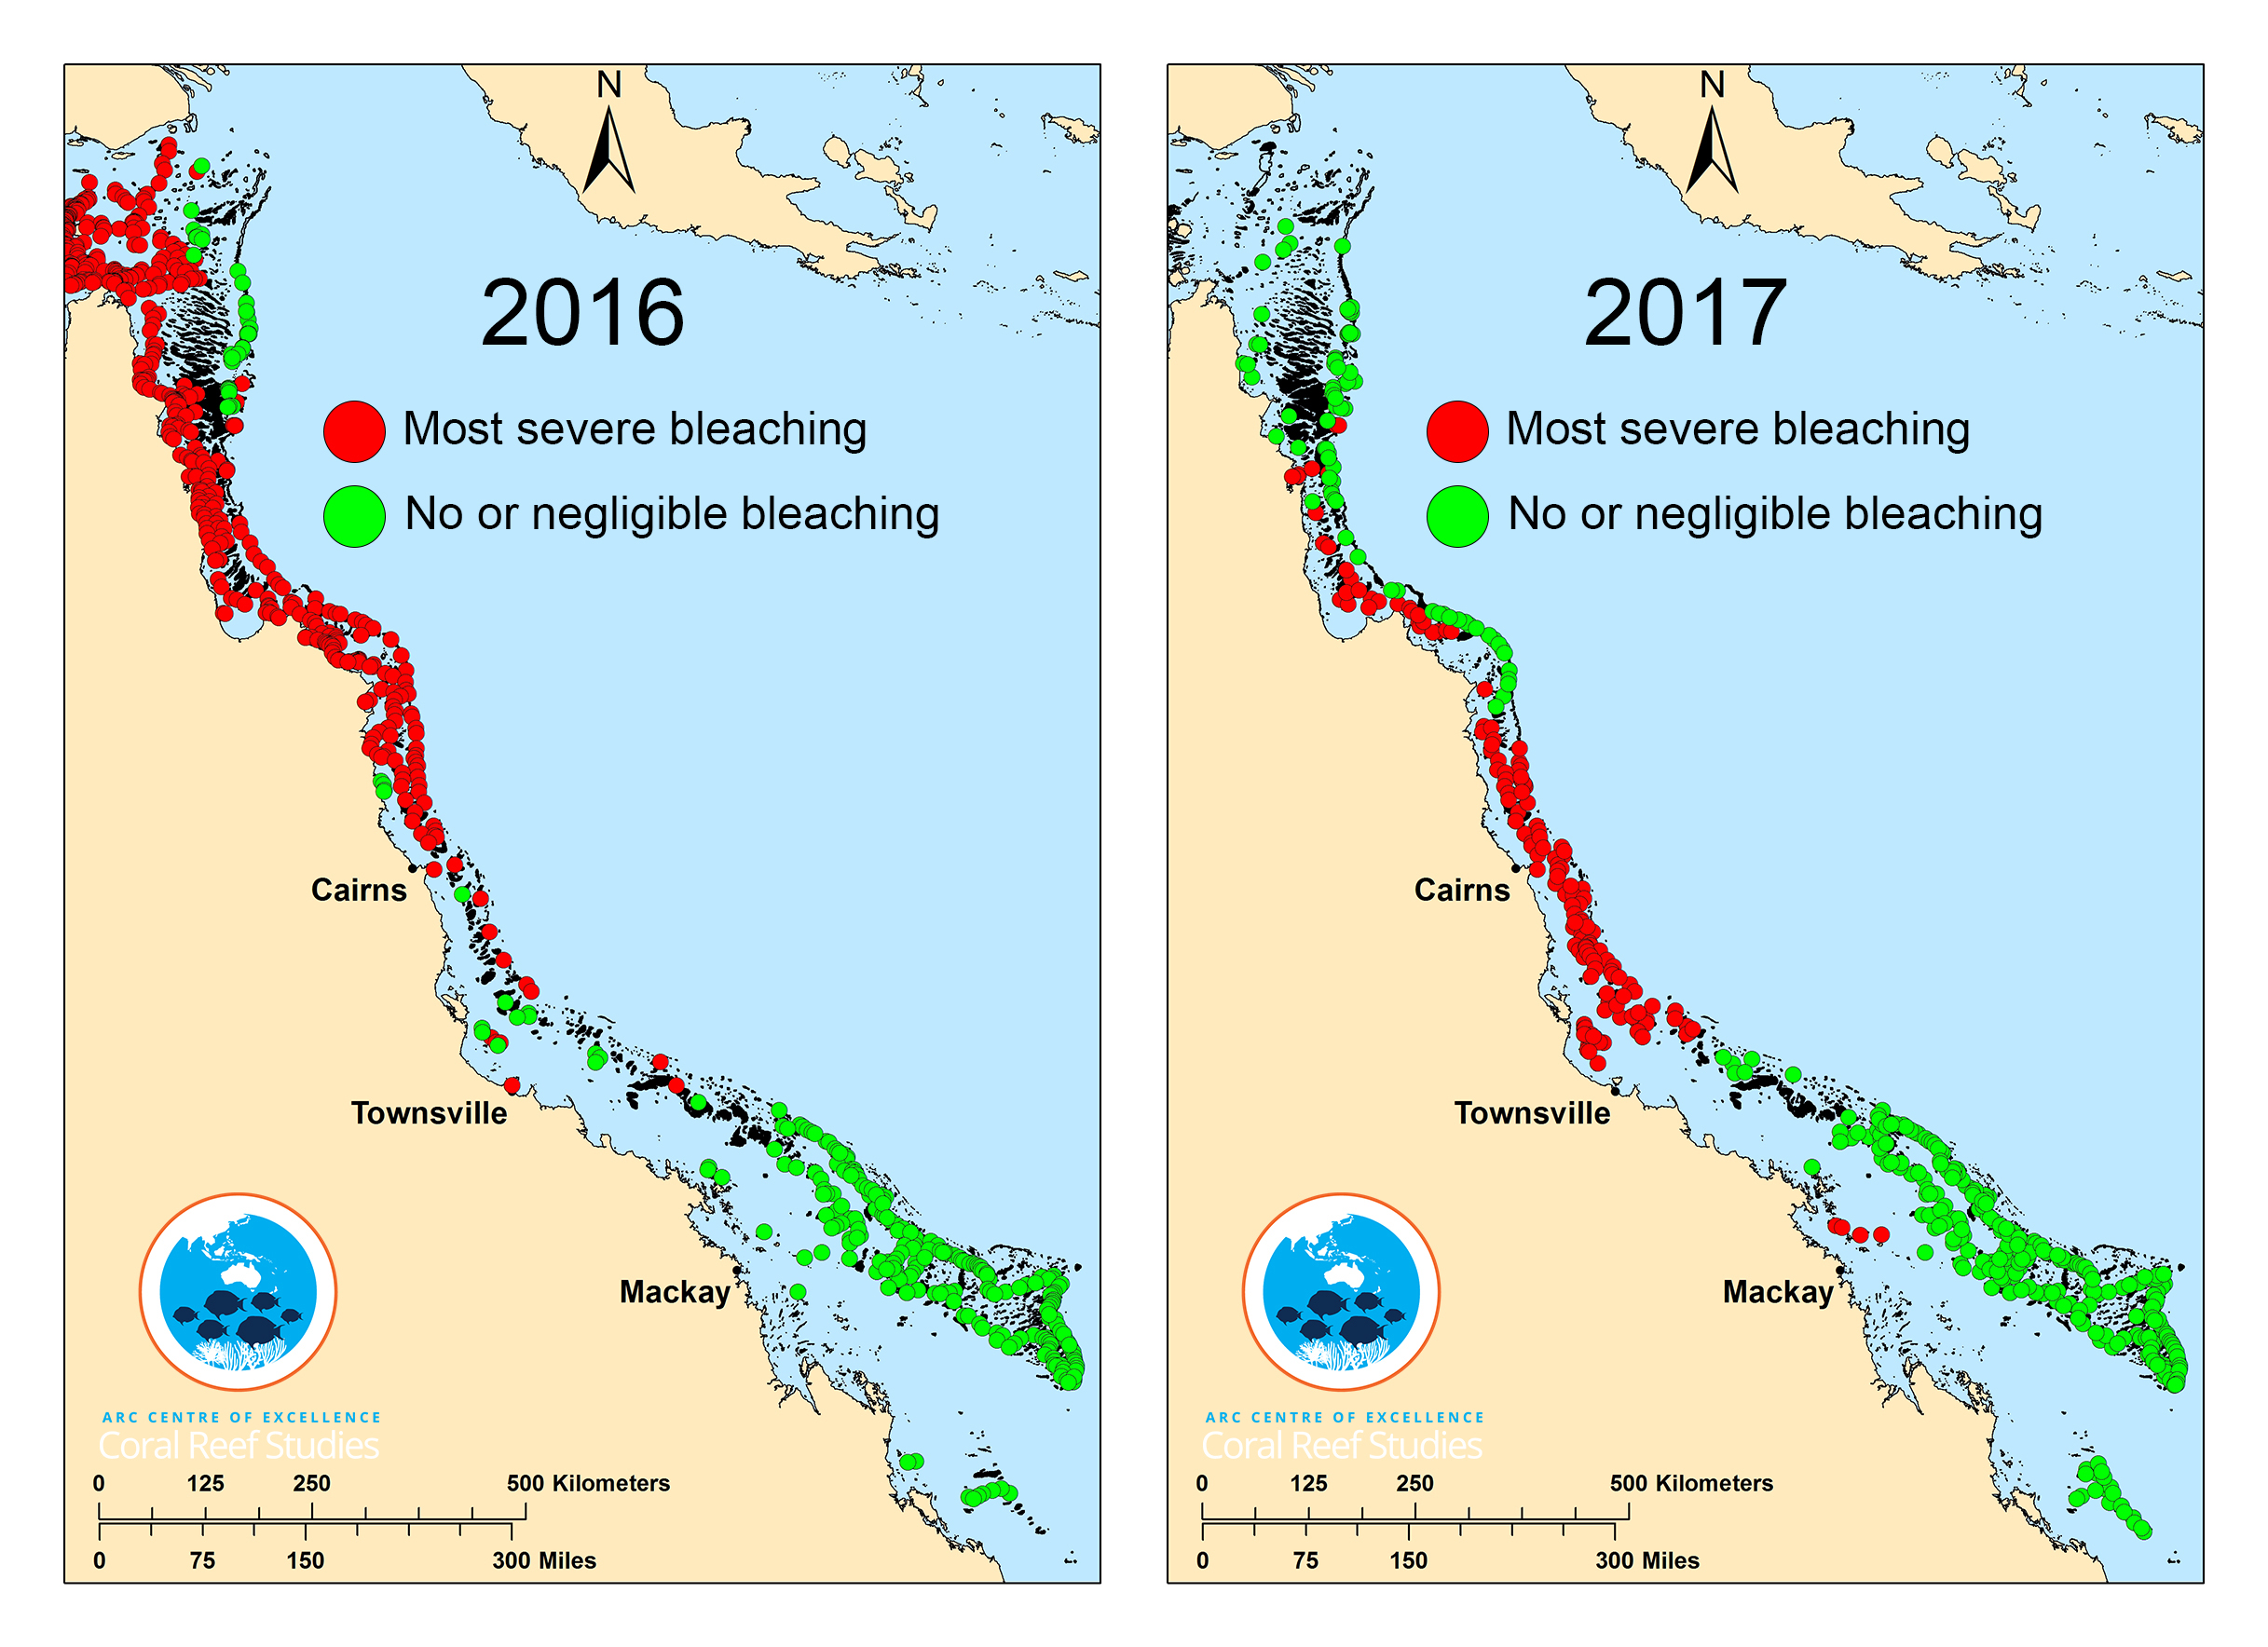 Two Thirds Of The Great Barrier Reef Is Now Officially Bleached